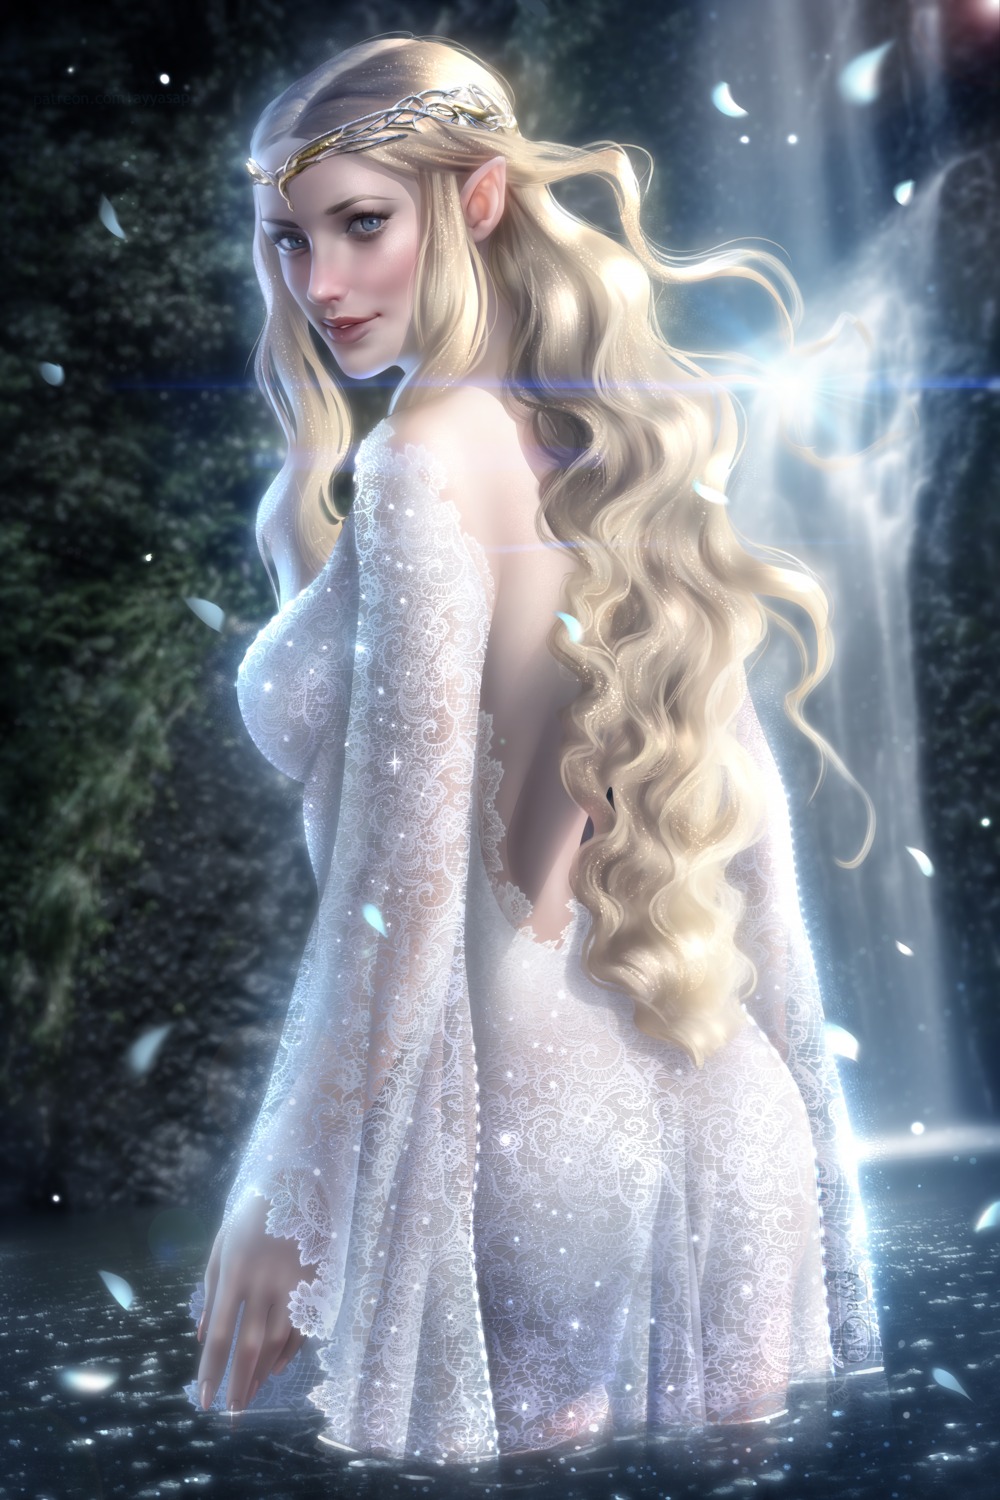 ass ayyasap dress galadriel lord_of_the_rings no_bra pointy_ears see_through wet